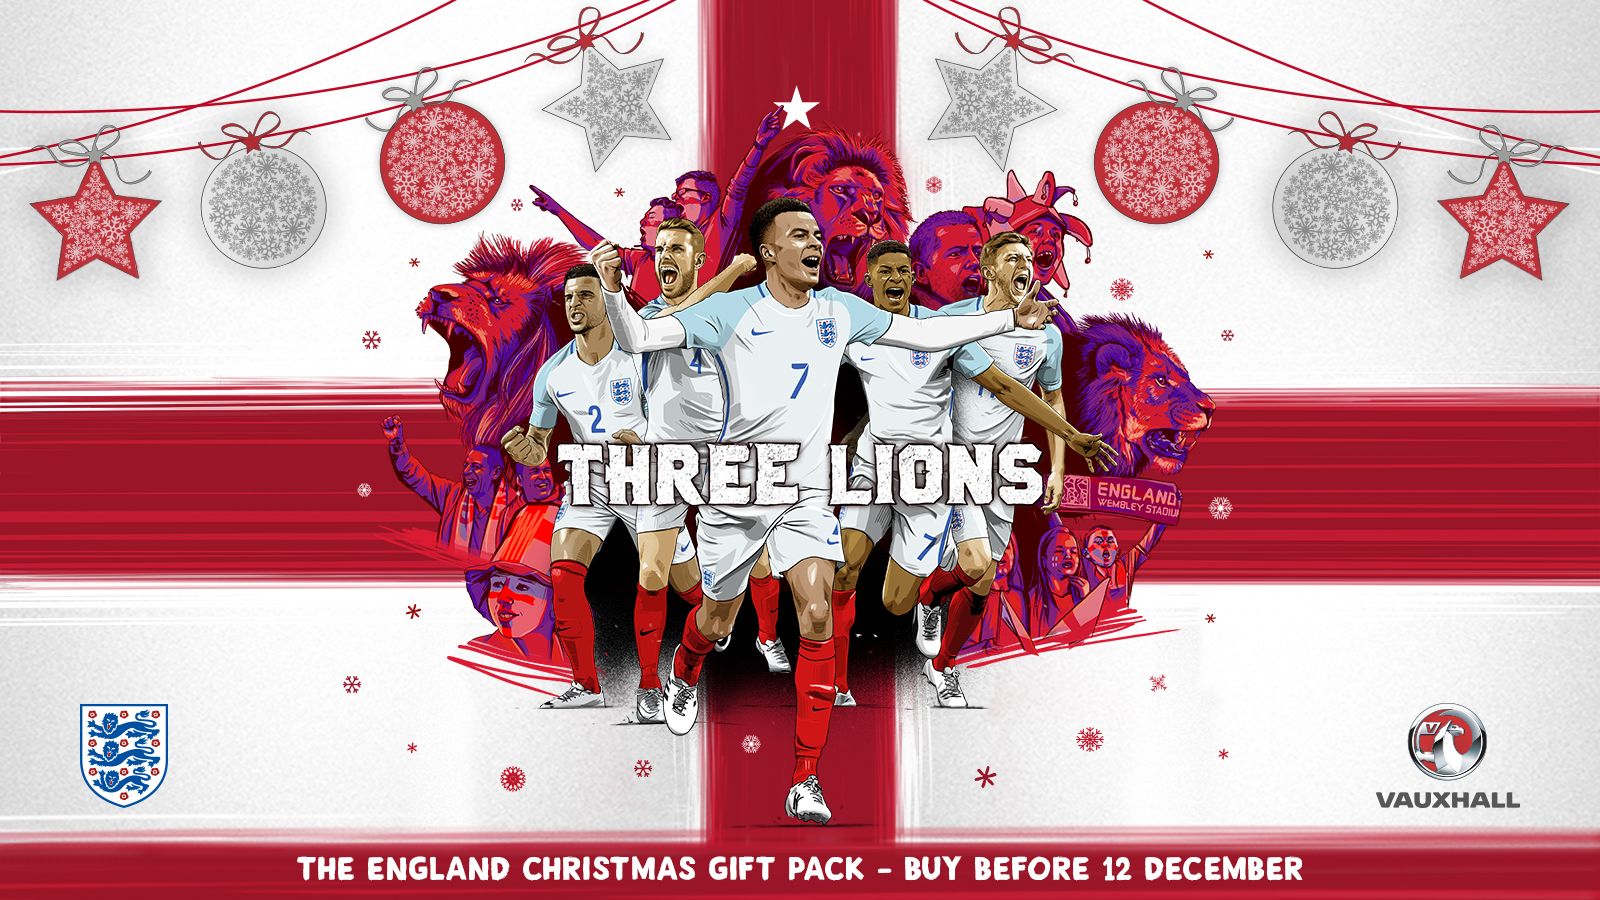 Italy tickets + Christmas gift pack now available for all members